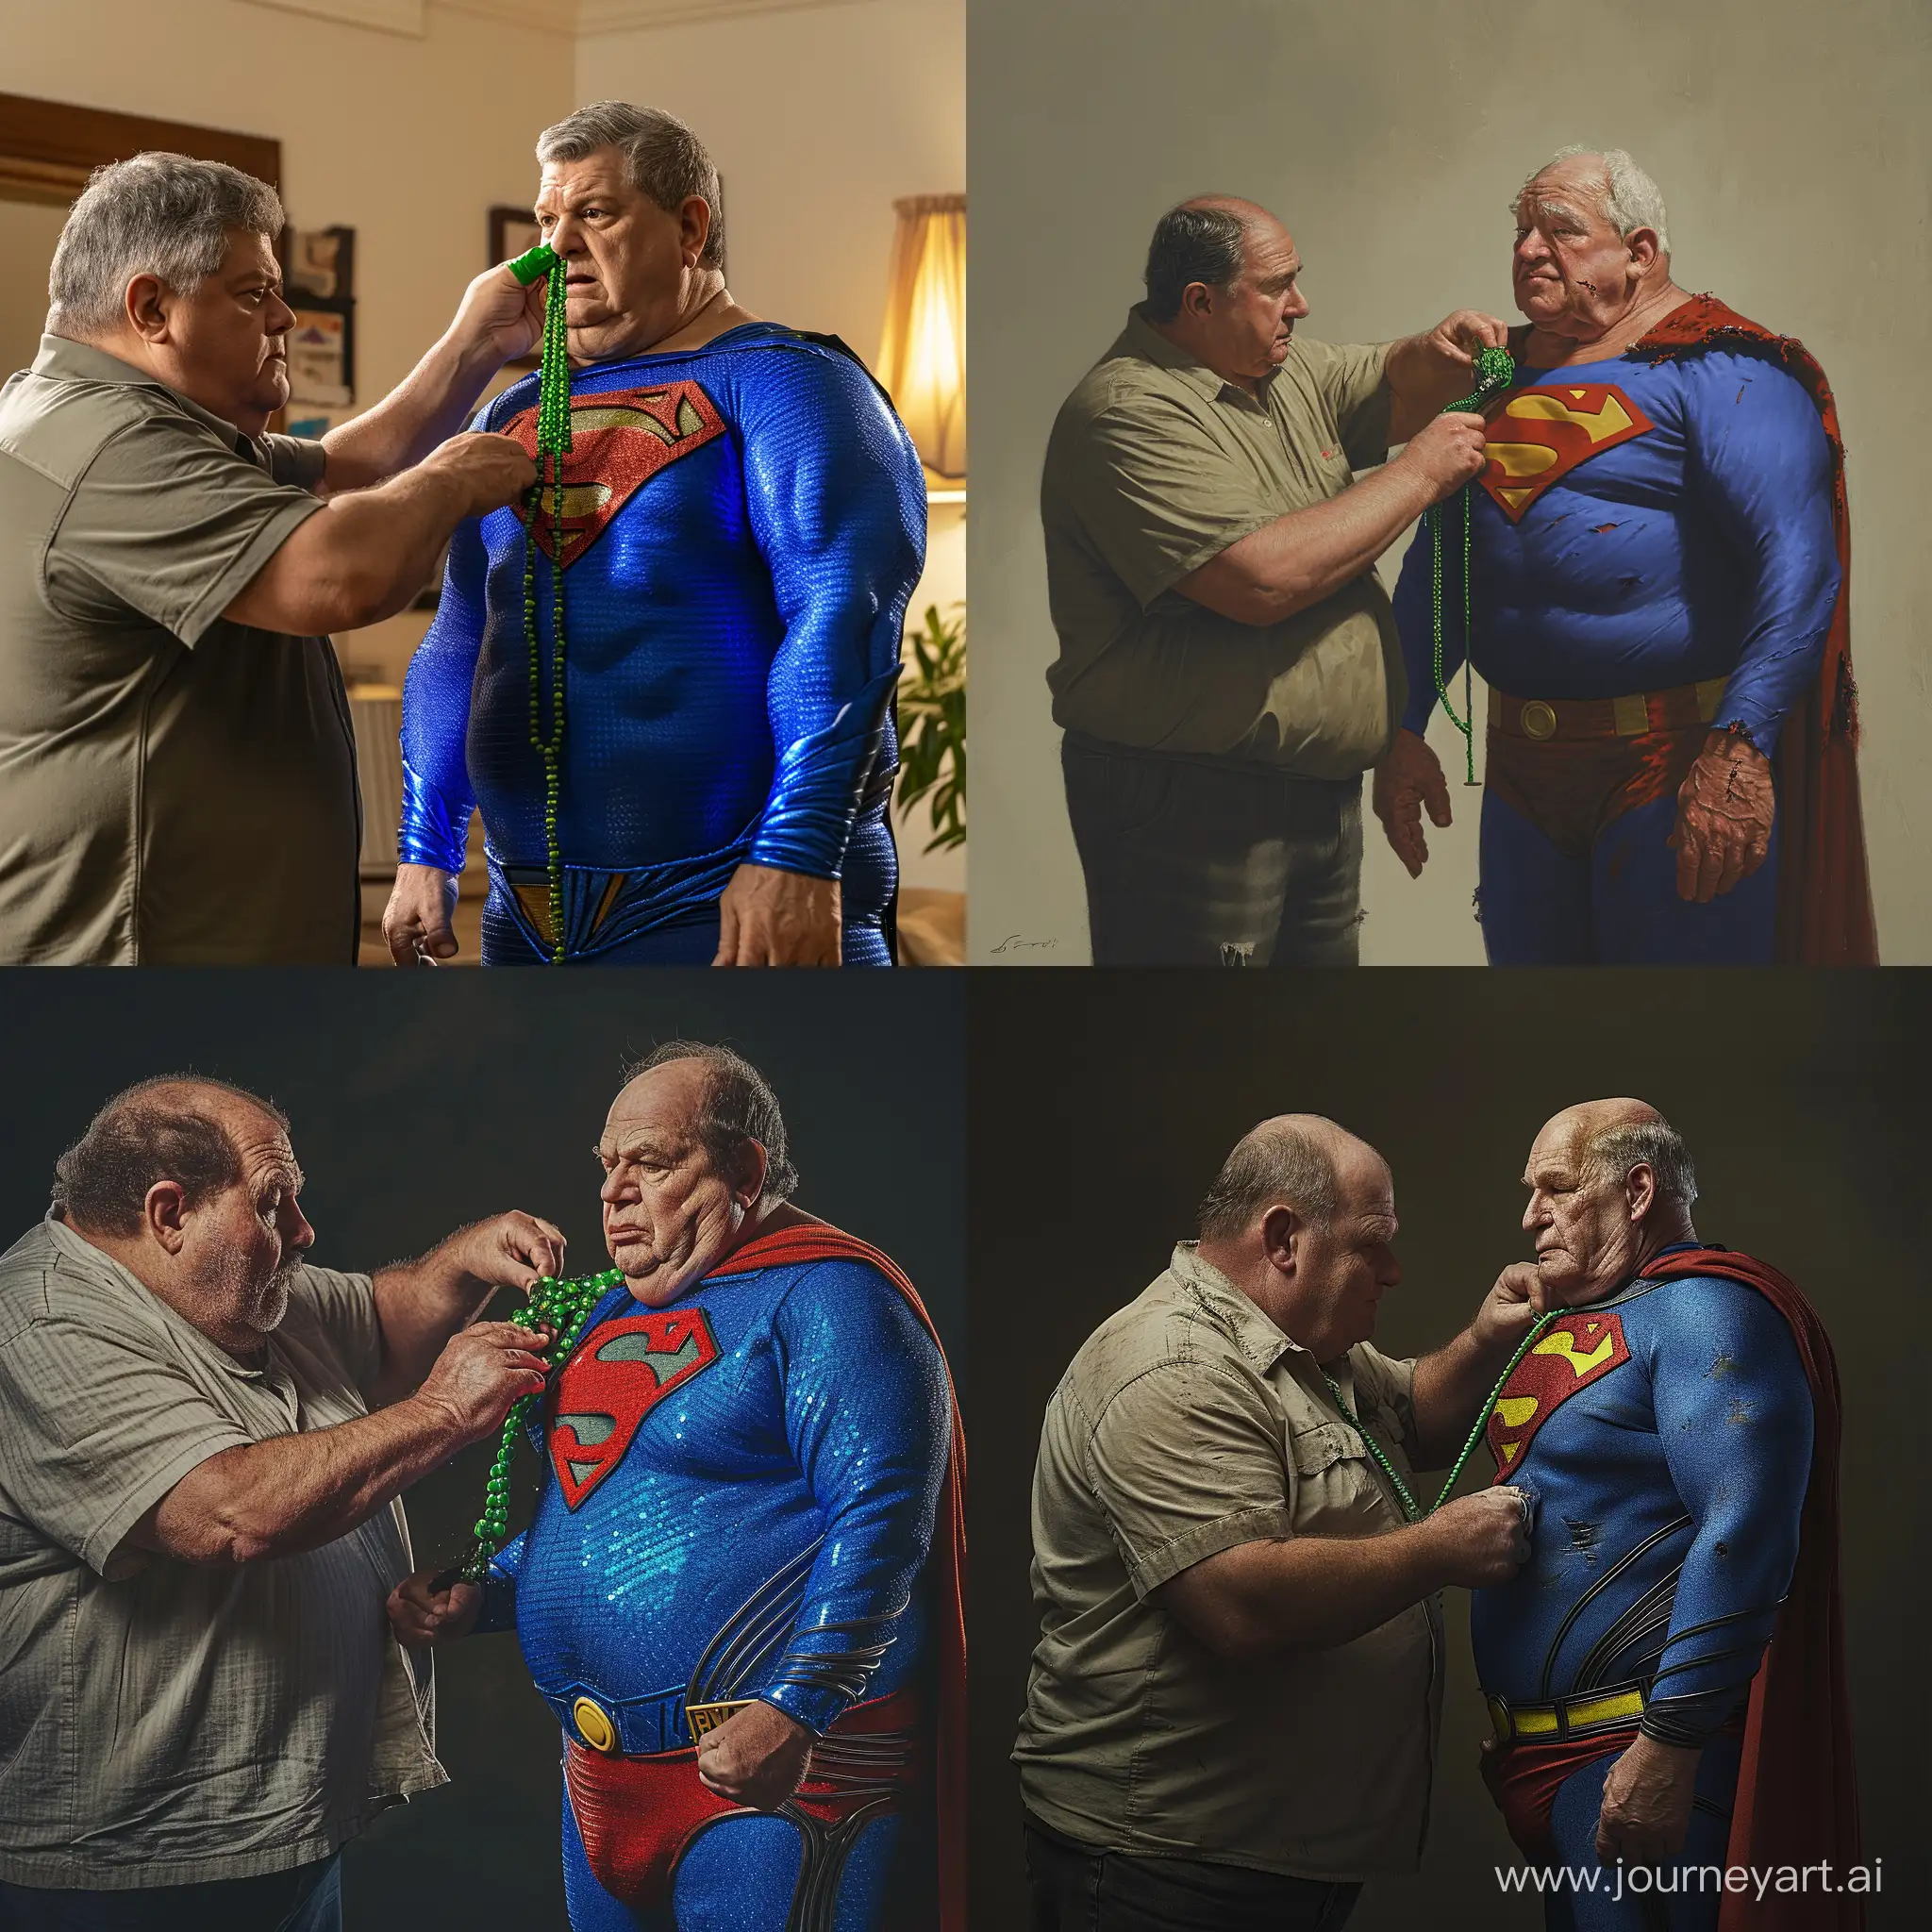 Scene with two men. The first man is a chubby man wearing a shirt. The first man is putting a green necklace on the second man. The second man is a chubby 70 years old man wearing a tight bright blue superman costume. The second man looks very weak --v 6